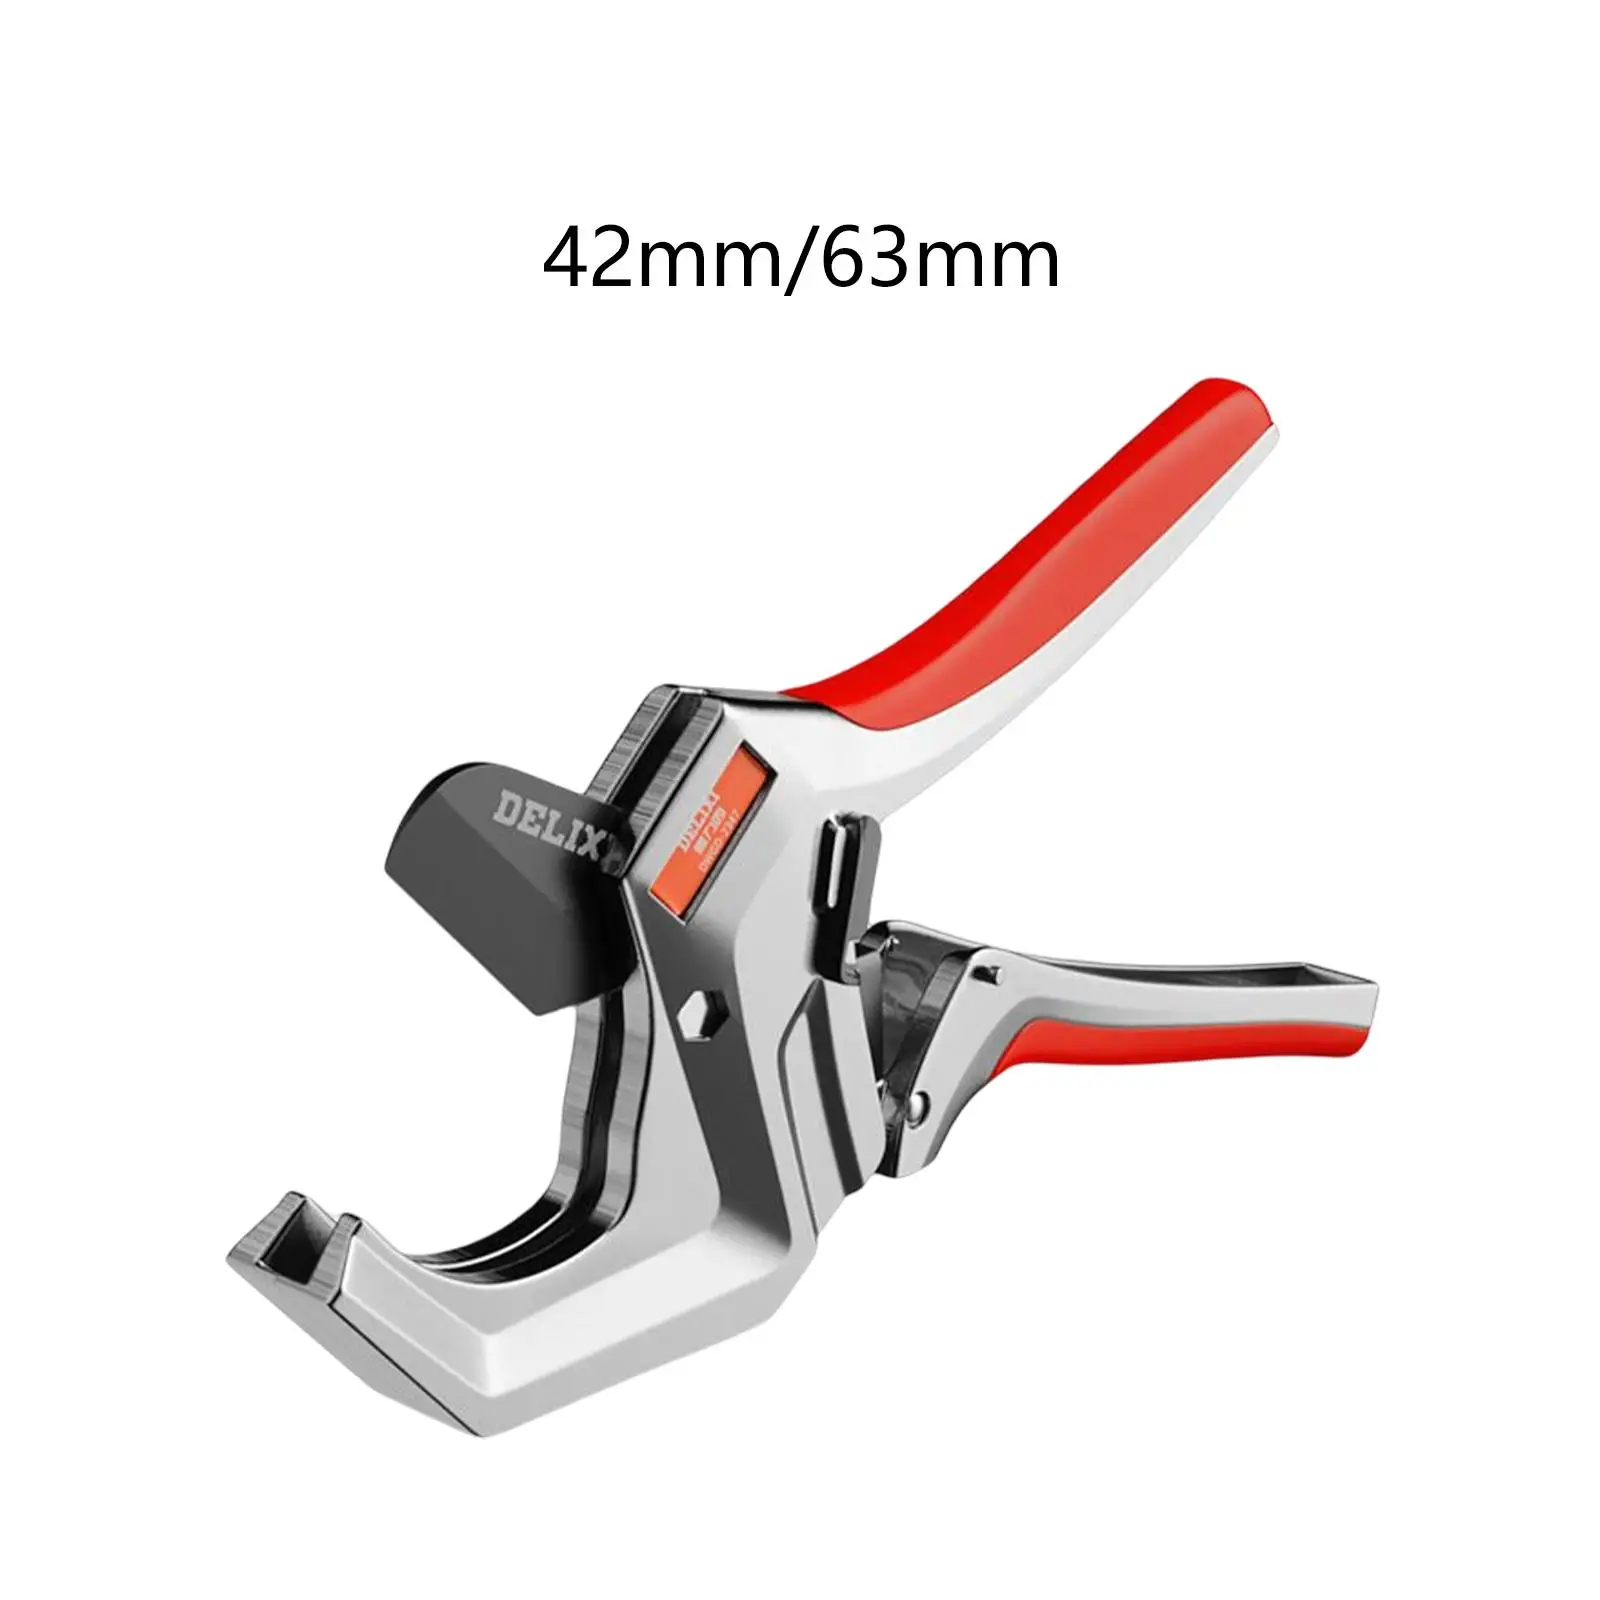 SK5 Steel PVC Pipe Cutter Aluminum Alloy Blade with Safety Lock Non Slip Handle Tubing Cutting Scissors Plumbing Pipes Plumber